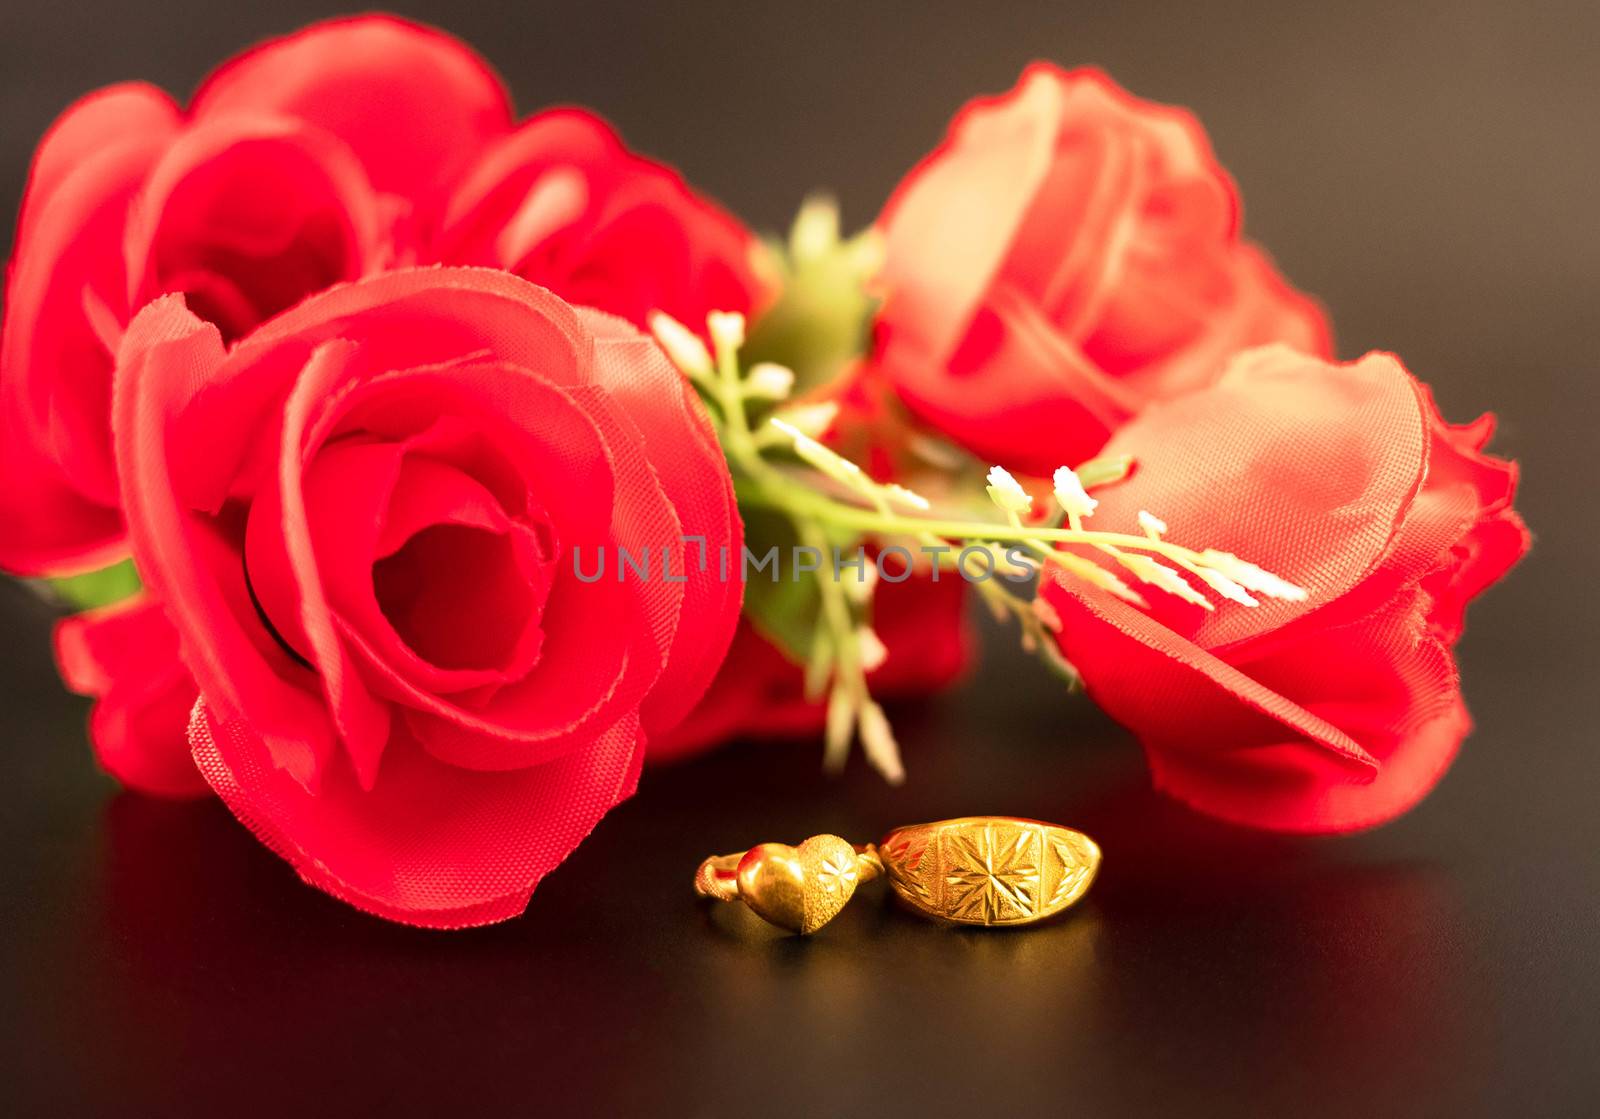 Wedding celebration on valentines day with red rose bouquet, wedding rings, isolated on dark background. Concept of love and romance. by TEERASAK